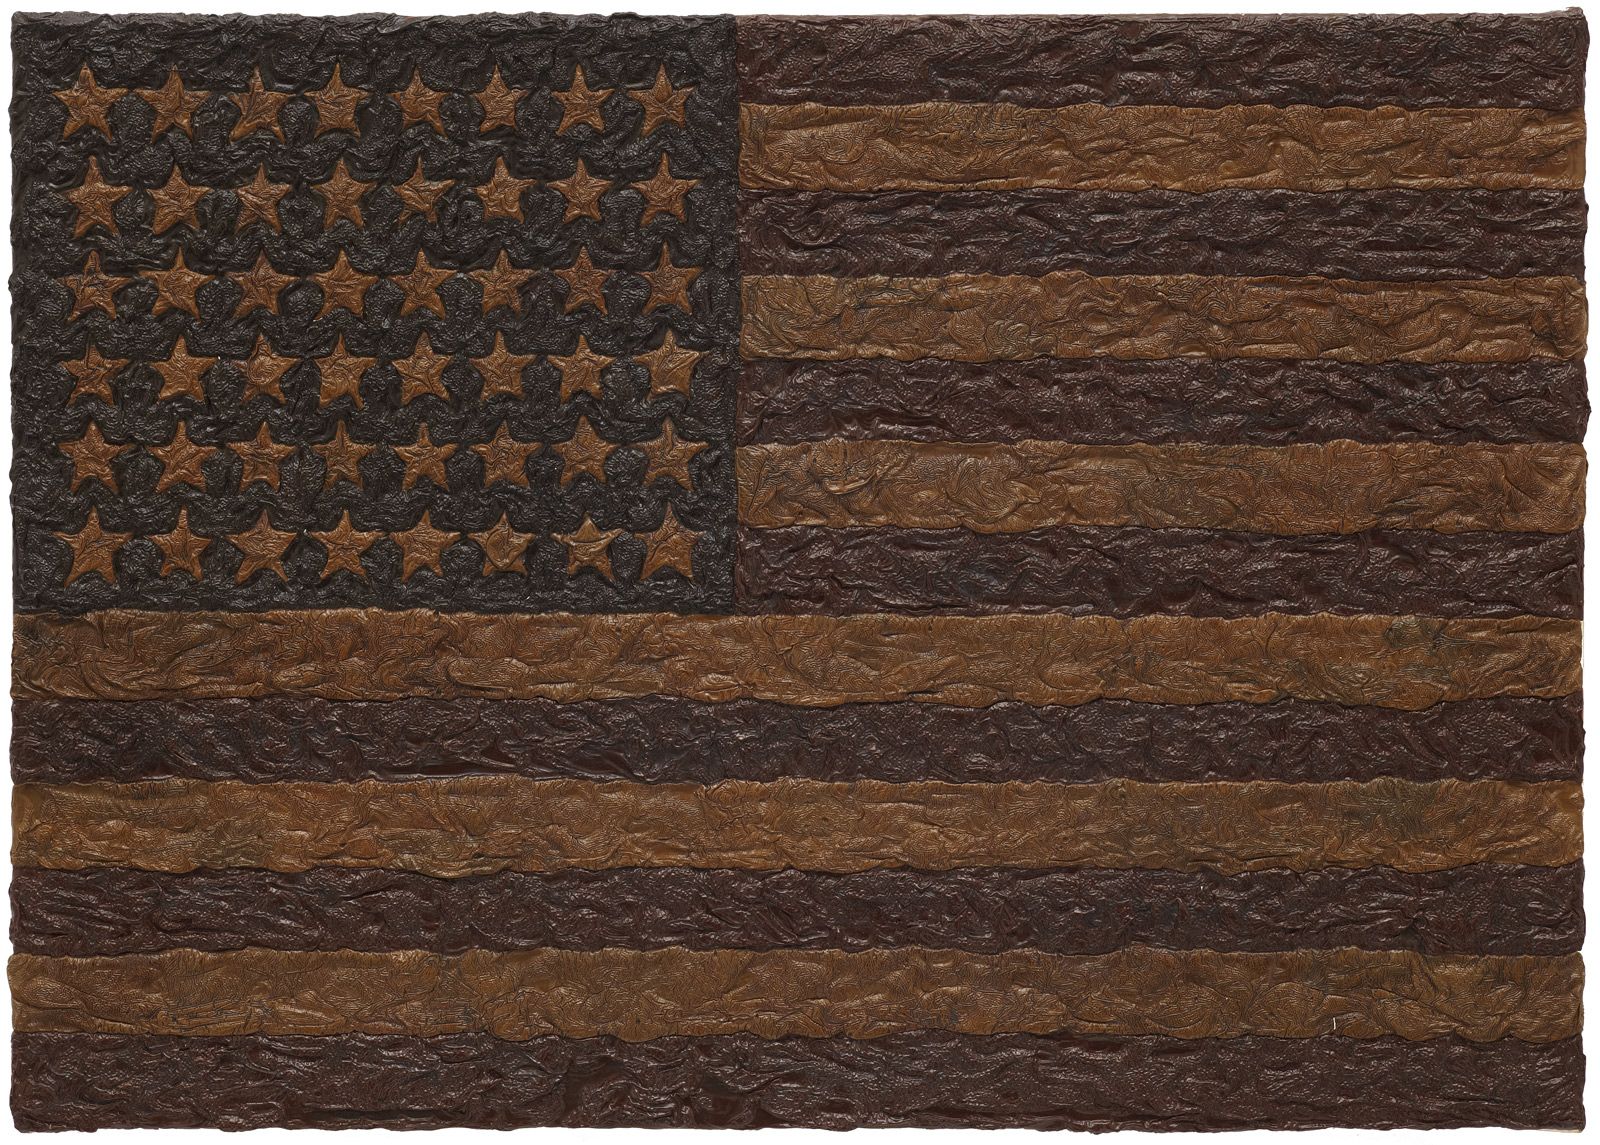  Oil painting of the 1959 US flag re-invented in thick oil paints. Heavily wrinkled.